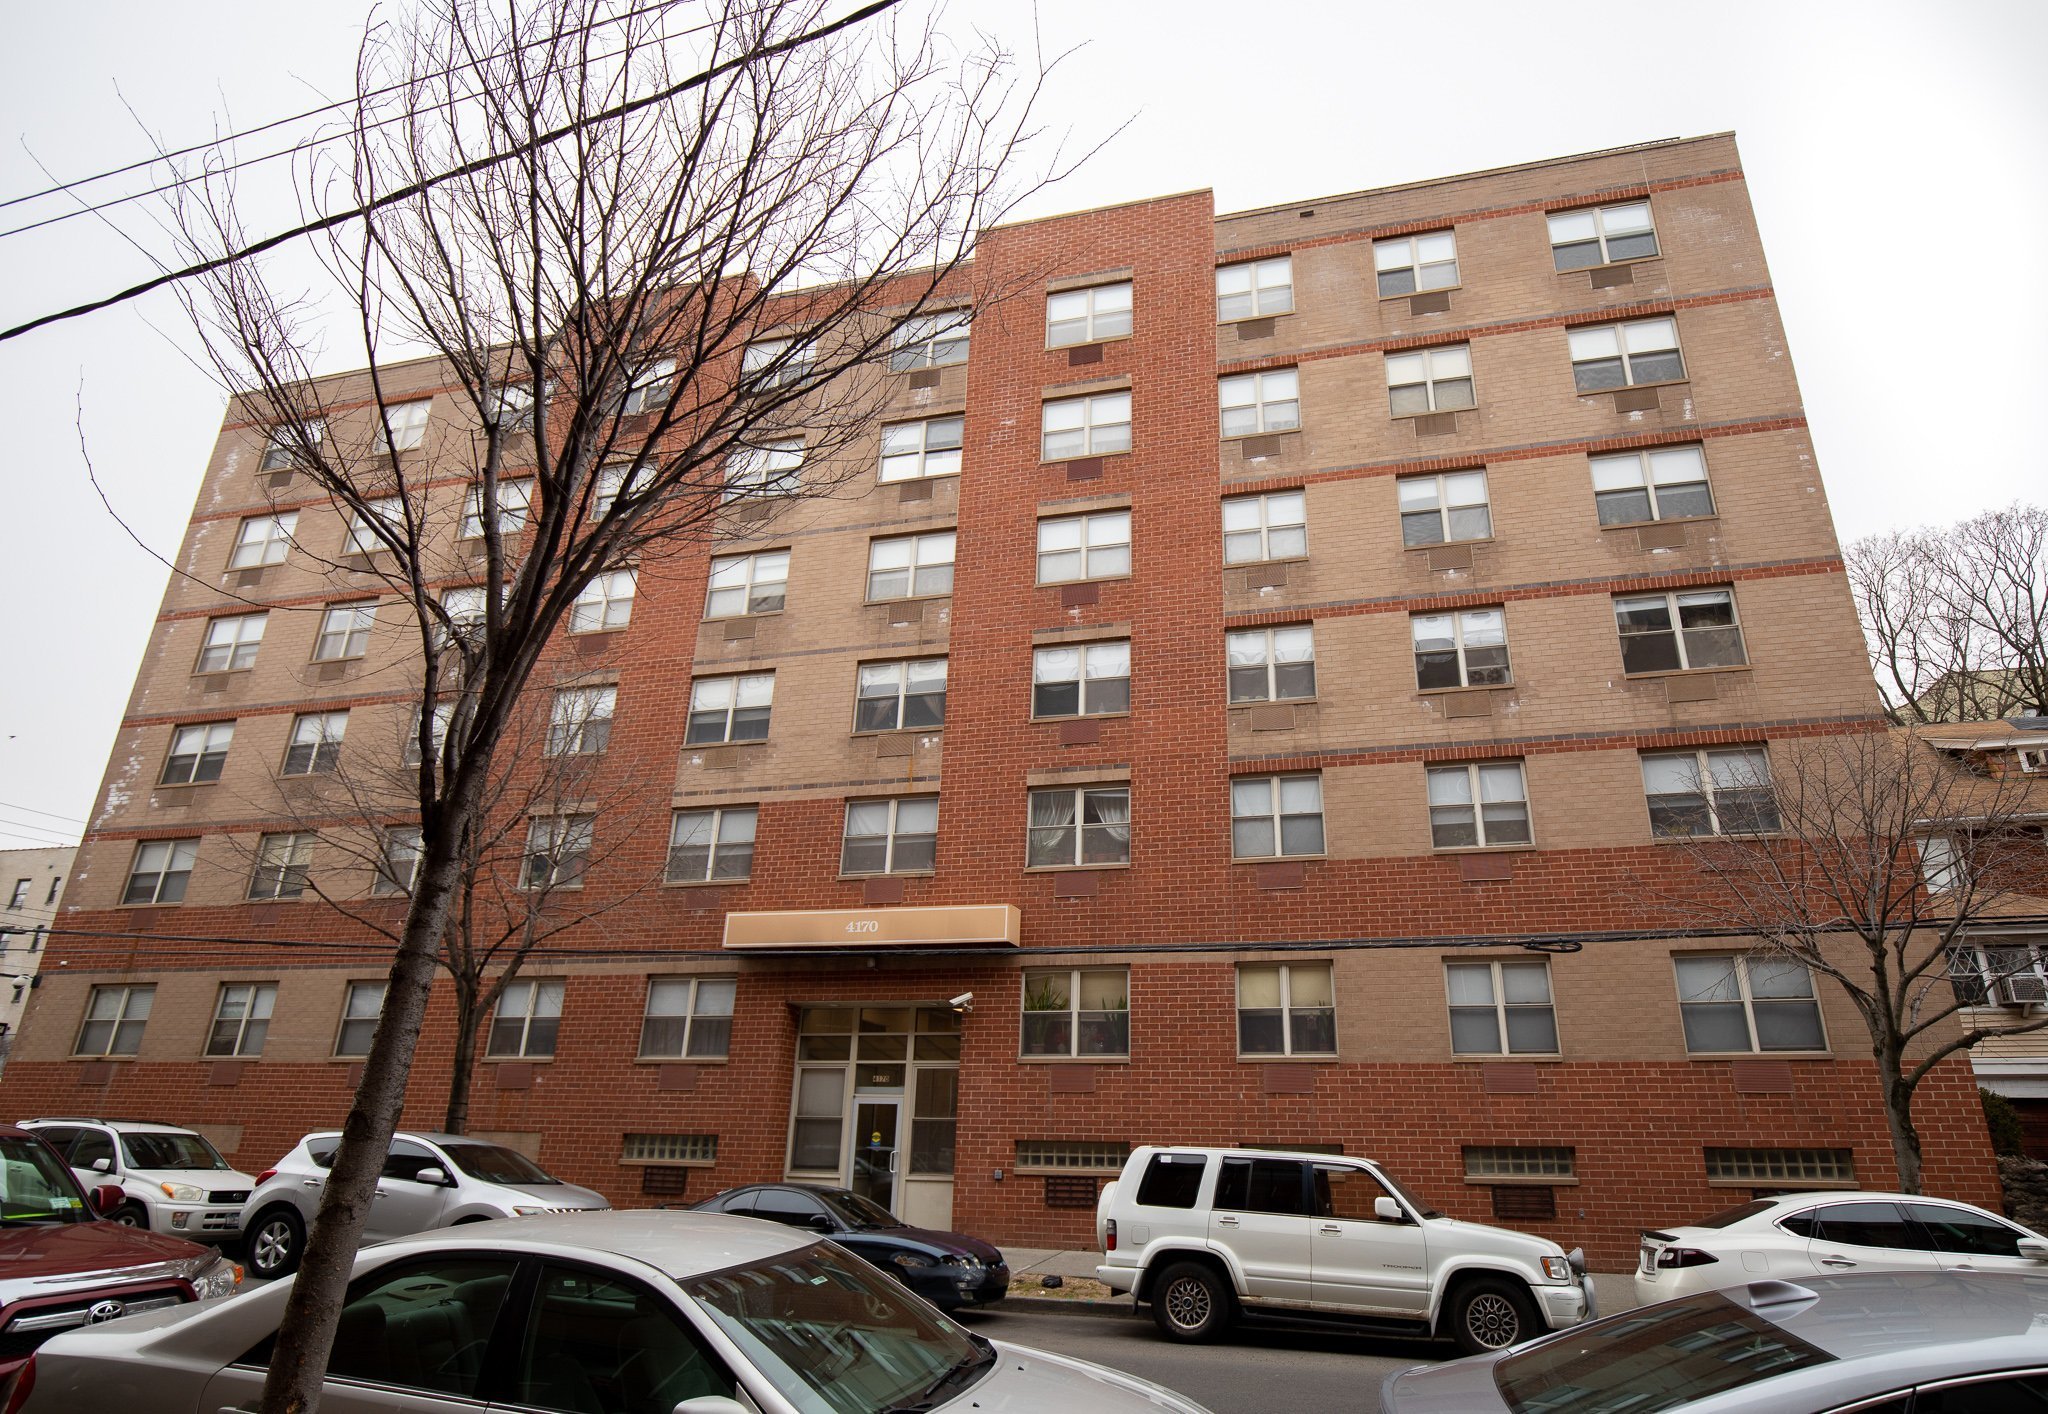 OUR LADY OF MERCY SENIOR HOUSING